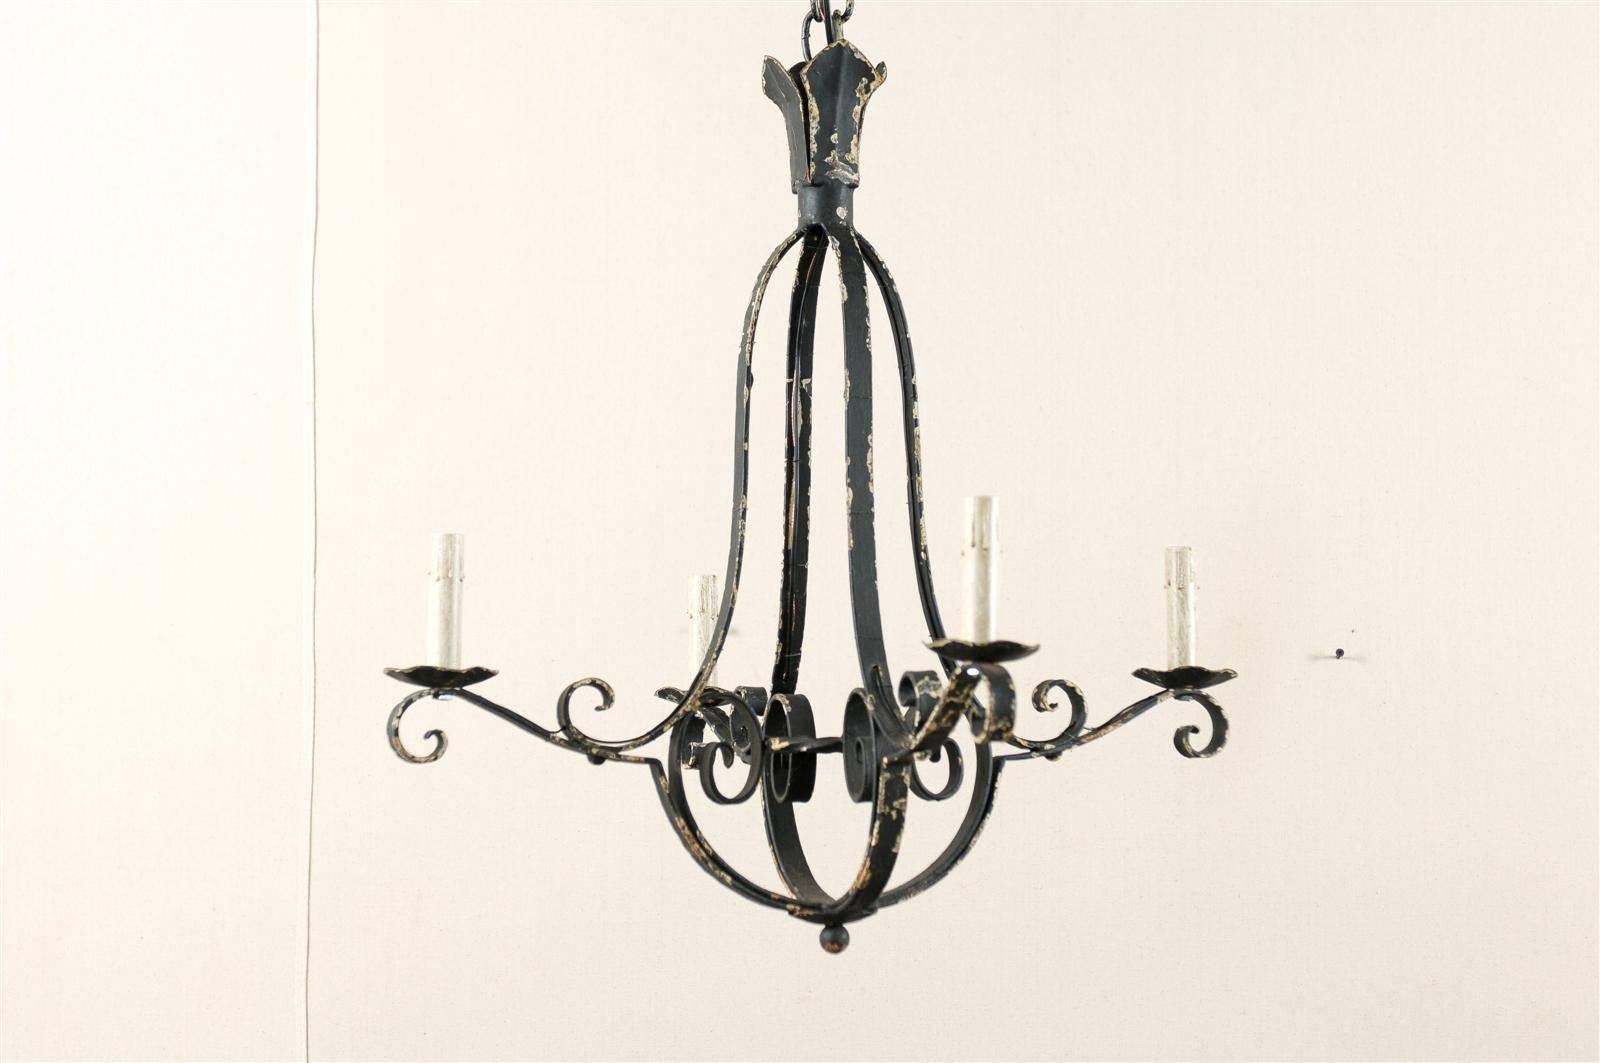 A French four-light chandelier. This French vintage mid-20th century light fixture has its nicely aged black paint with plaster over iron original finish. This chandelier features an elegant pear shaped central column with four scrolled arms flowing